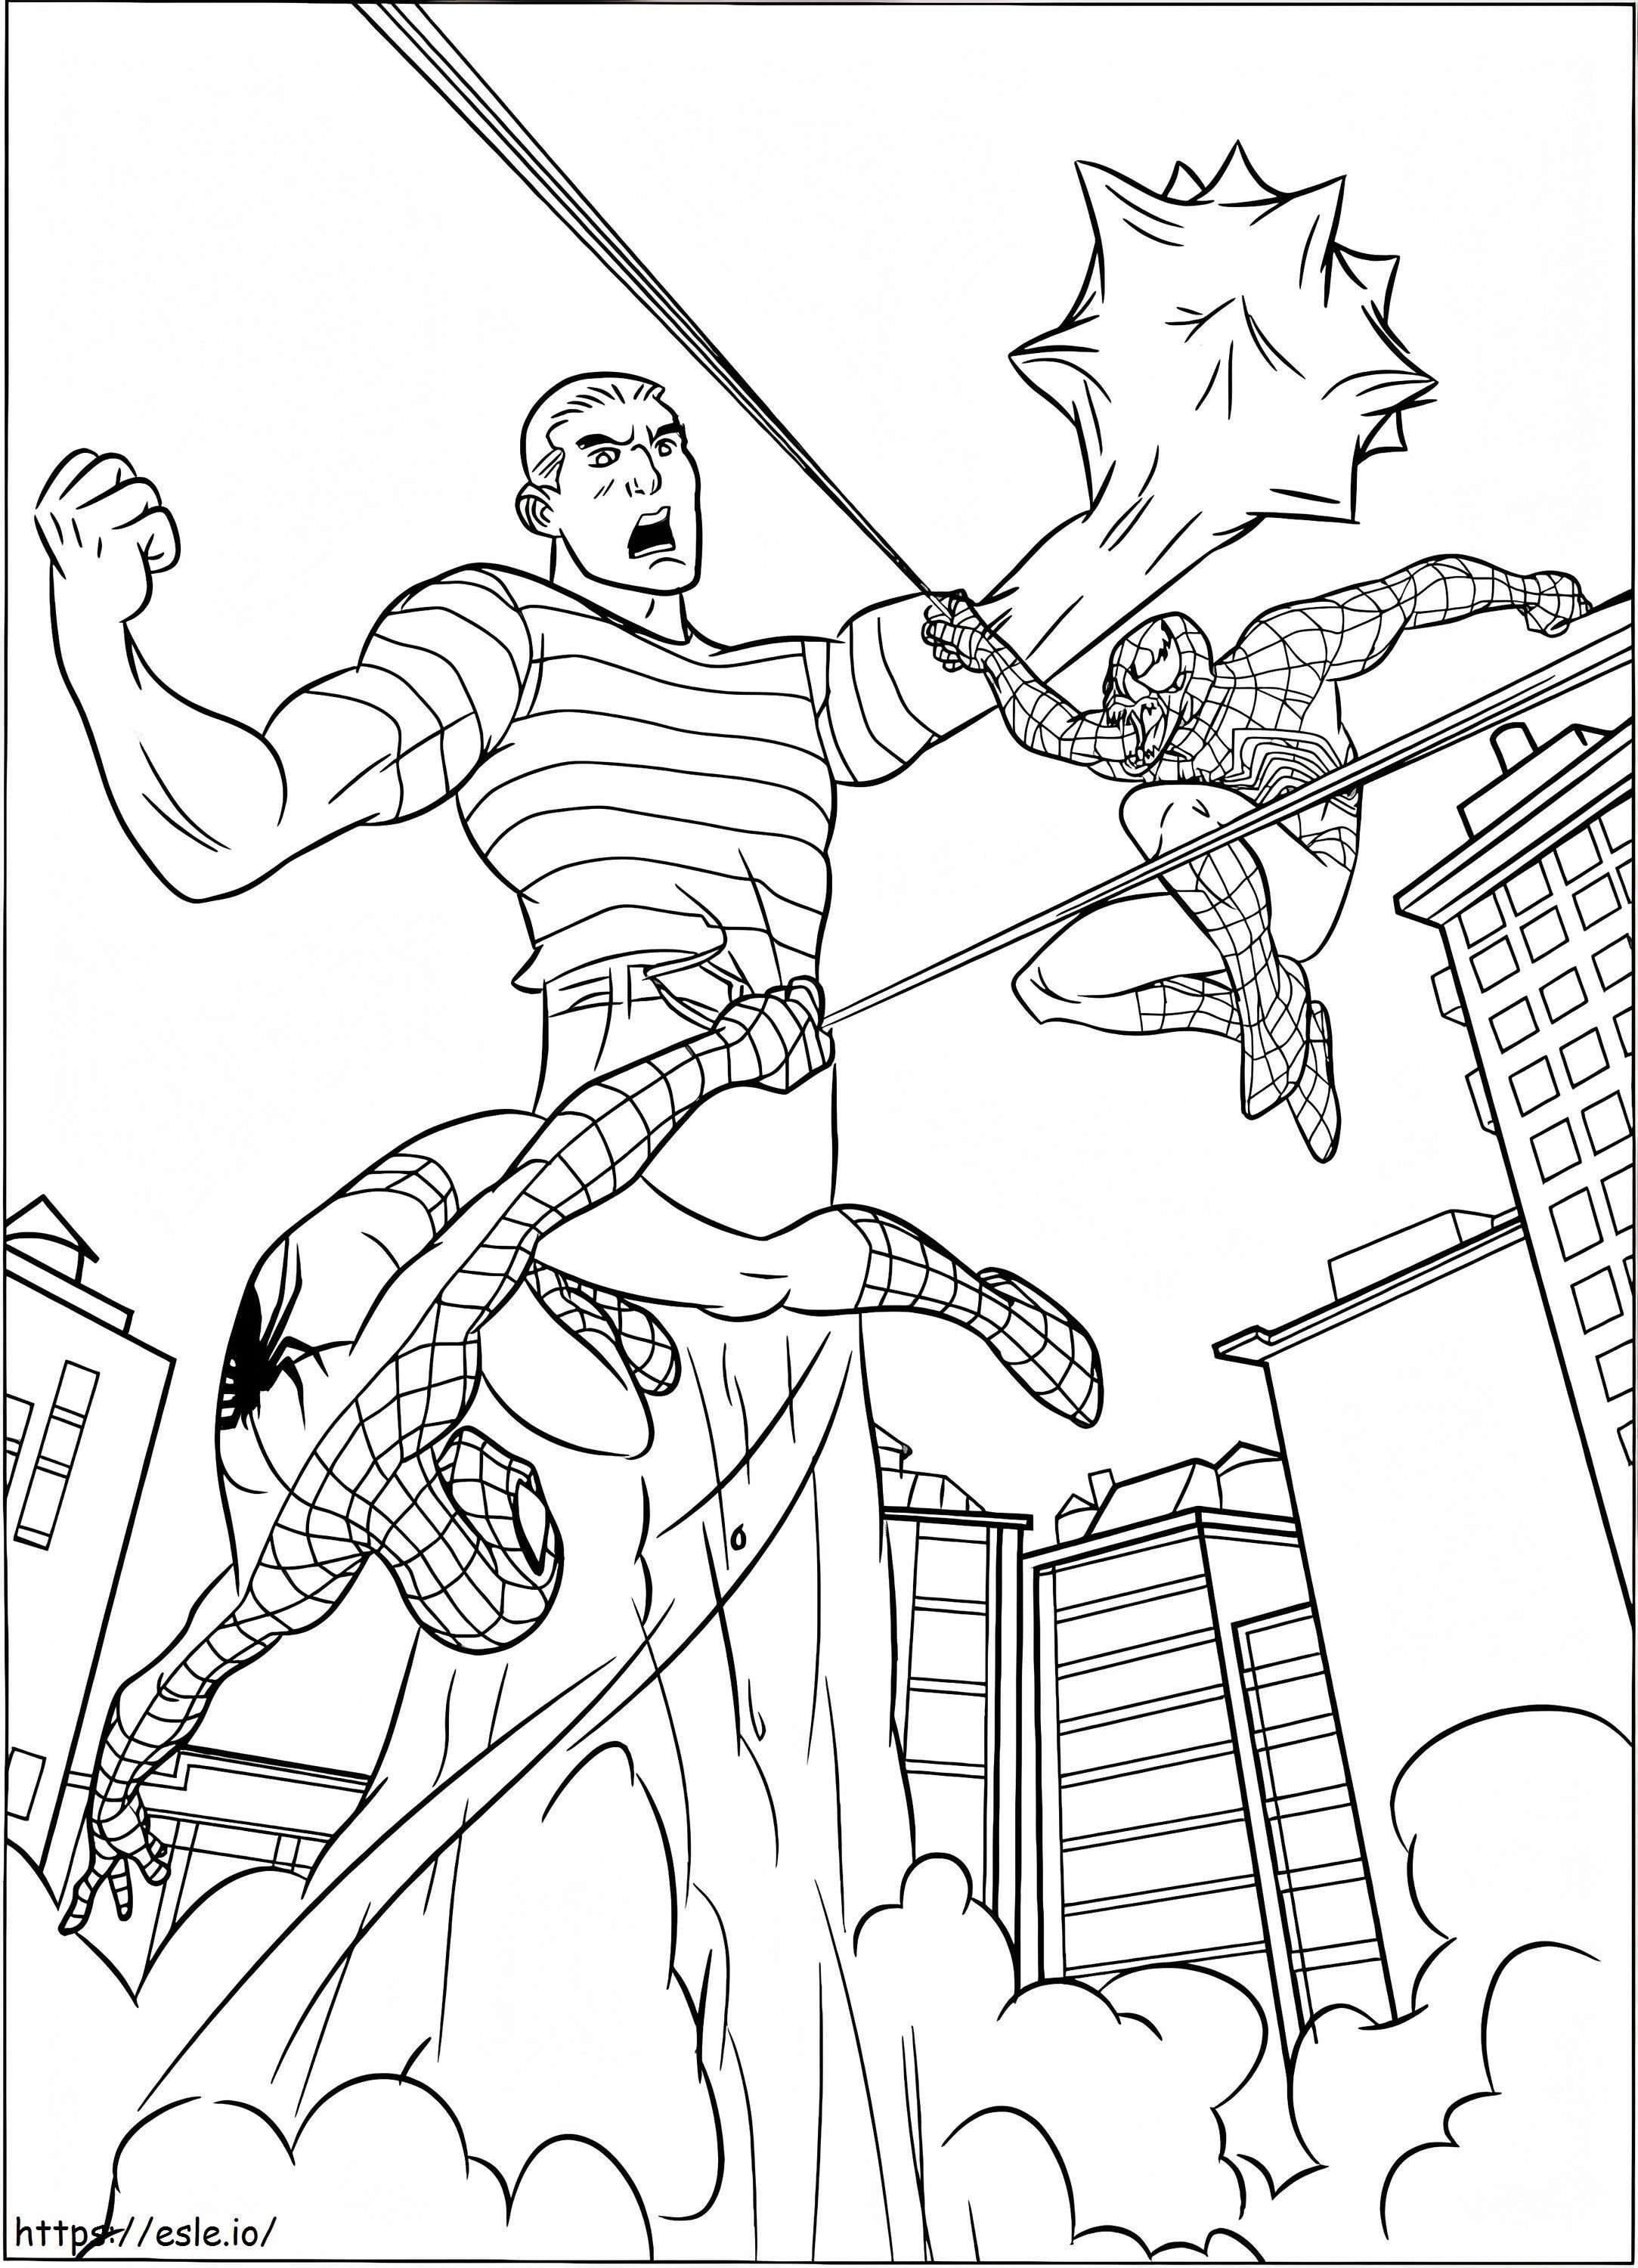 Spider Man And The Villains coloring page